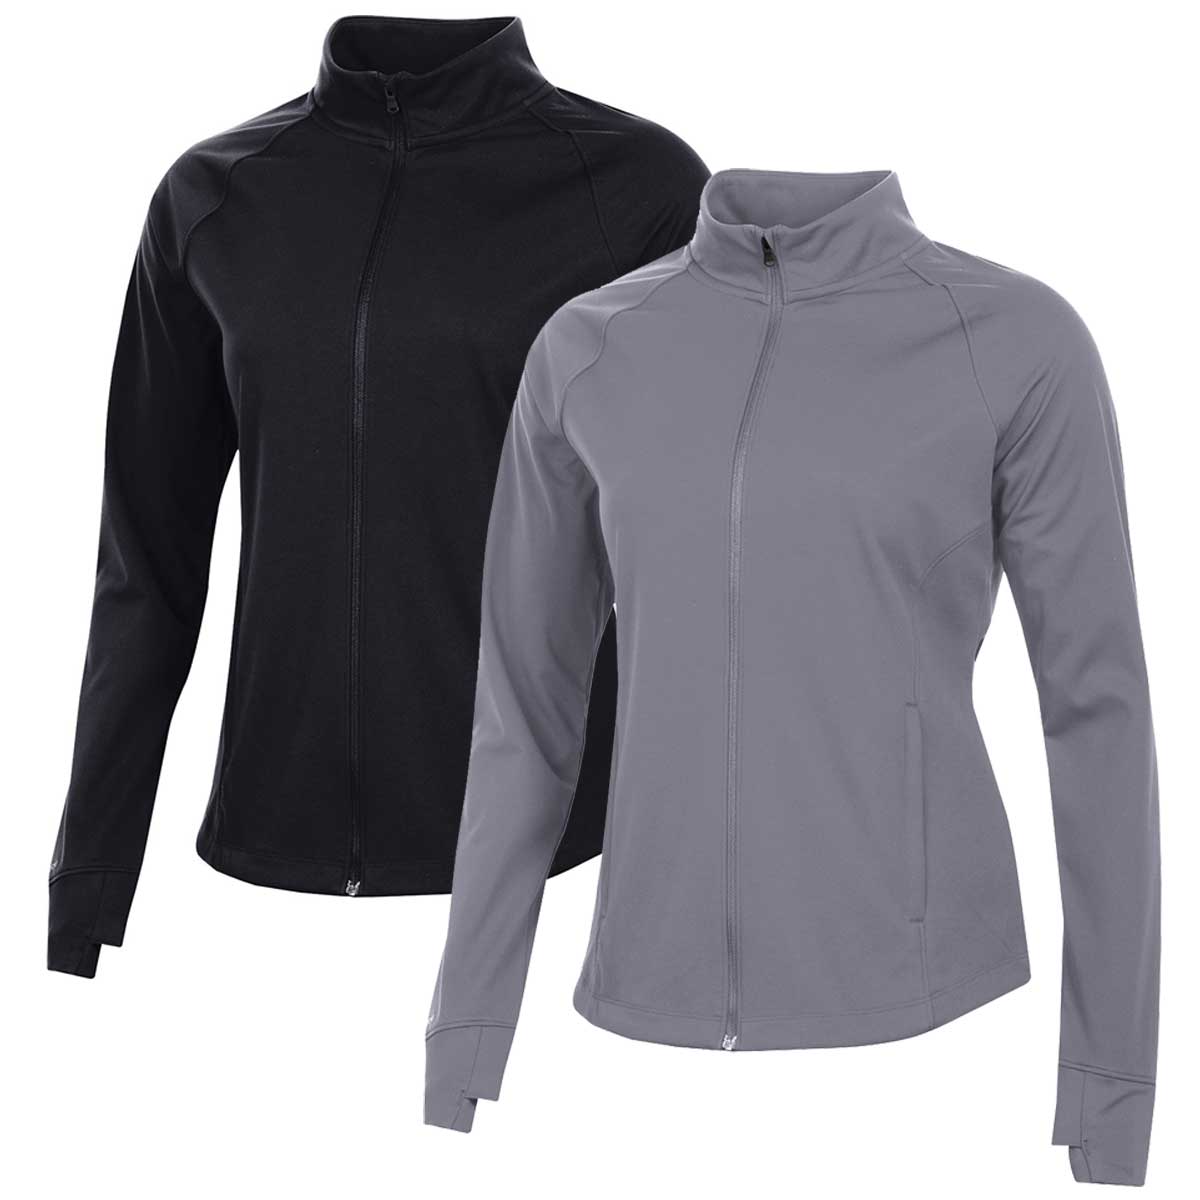 womens under armour softshell jacket